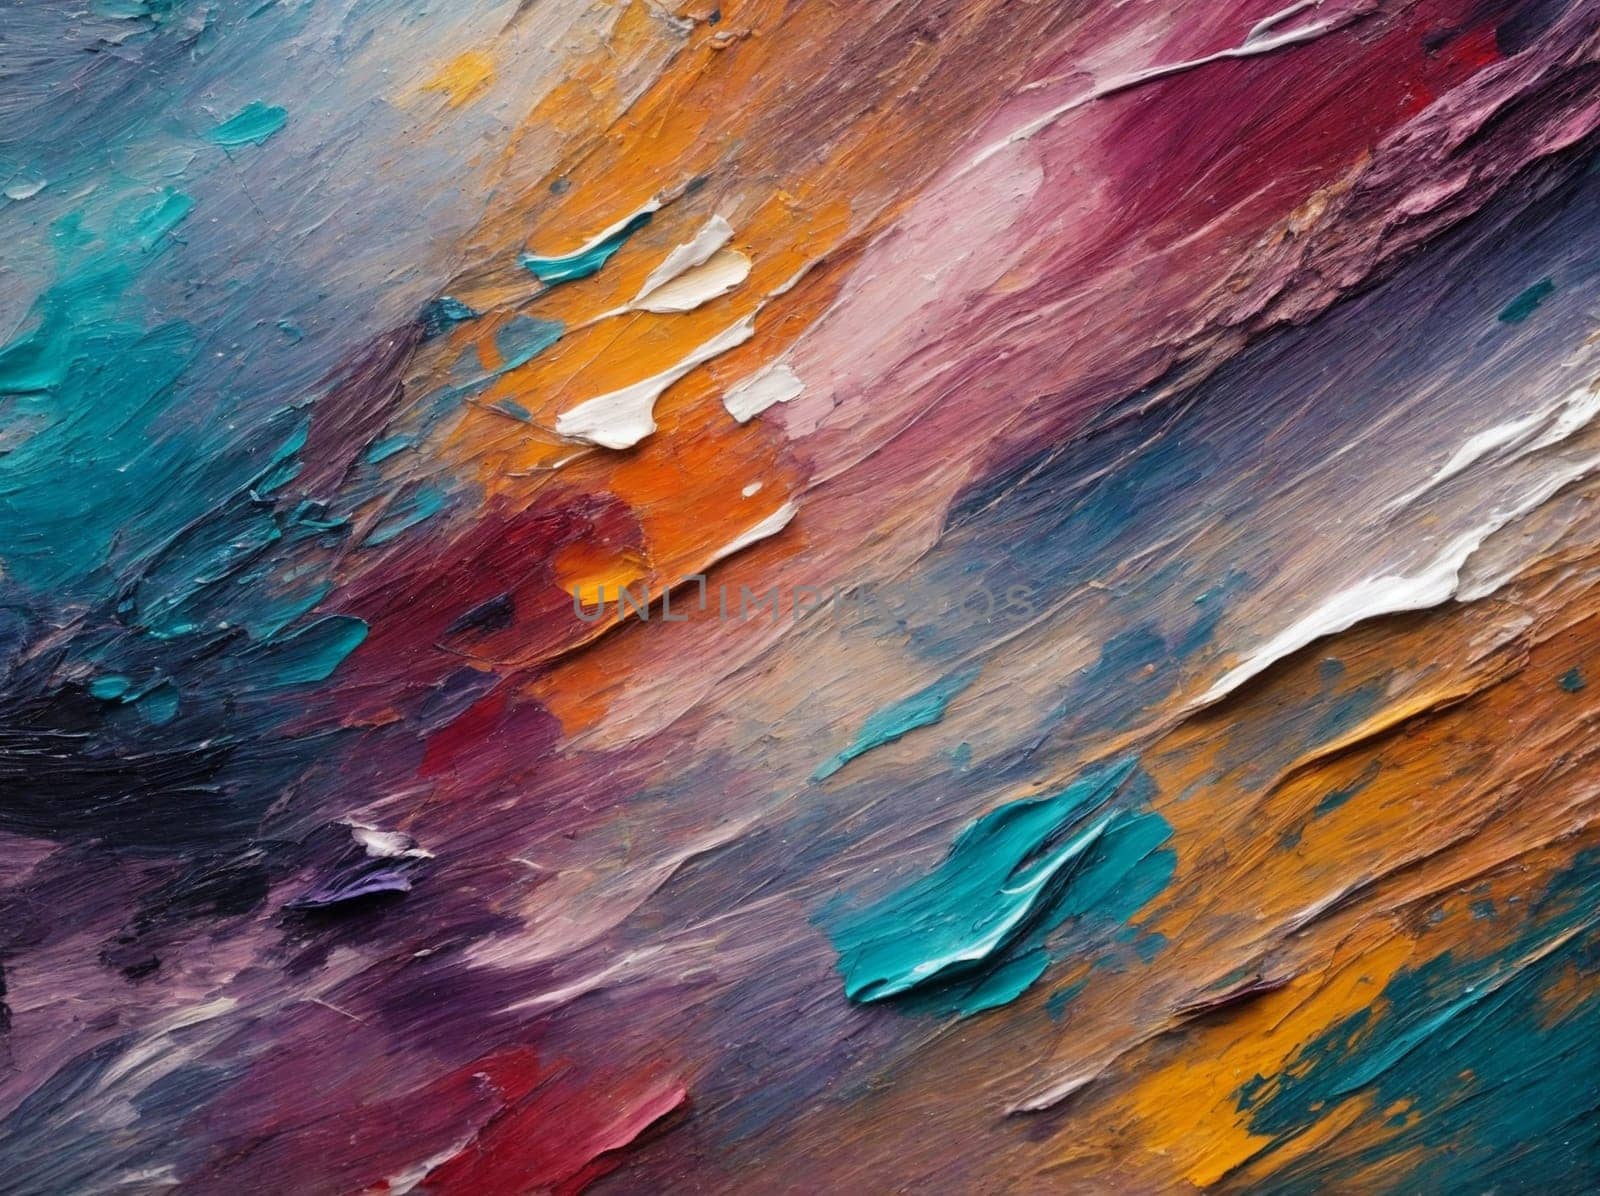 A detailed view of an abstract painting, showcasing its vibrant colors, intricate brushwork, and expressive forms.